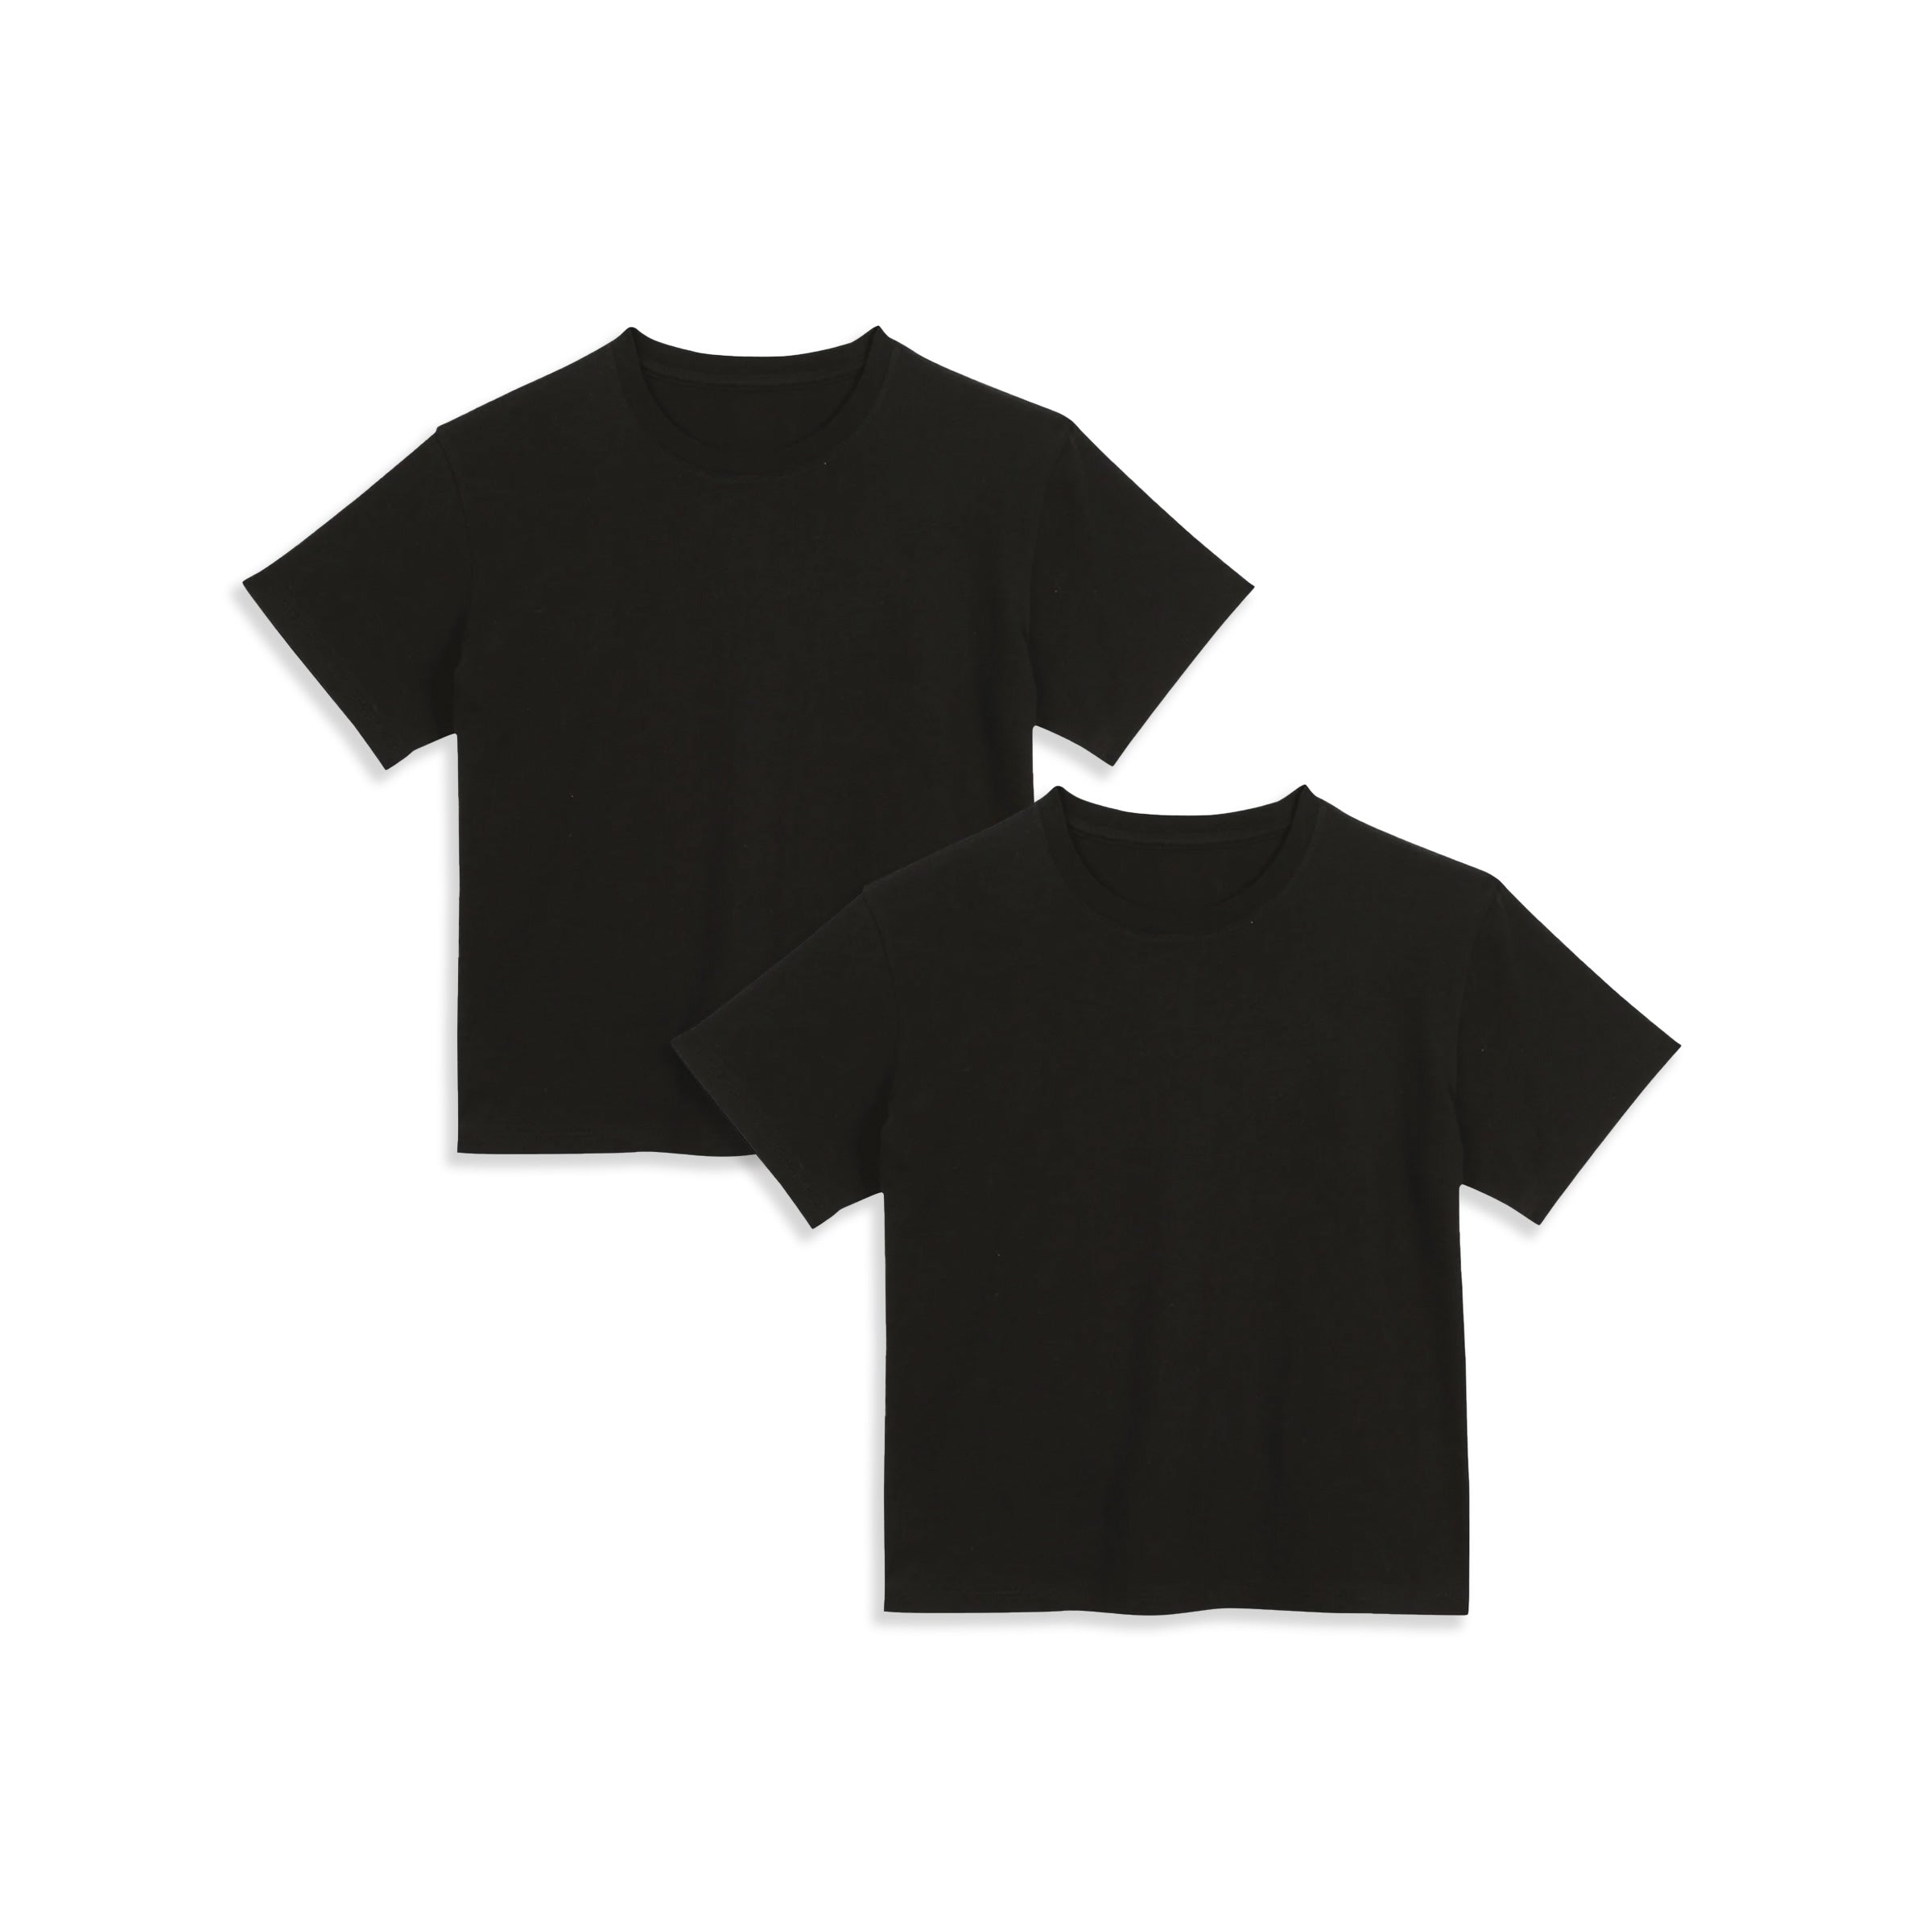  wearing Black The Cotton Boxy Crew Tee 2-Pack